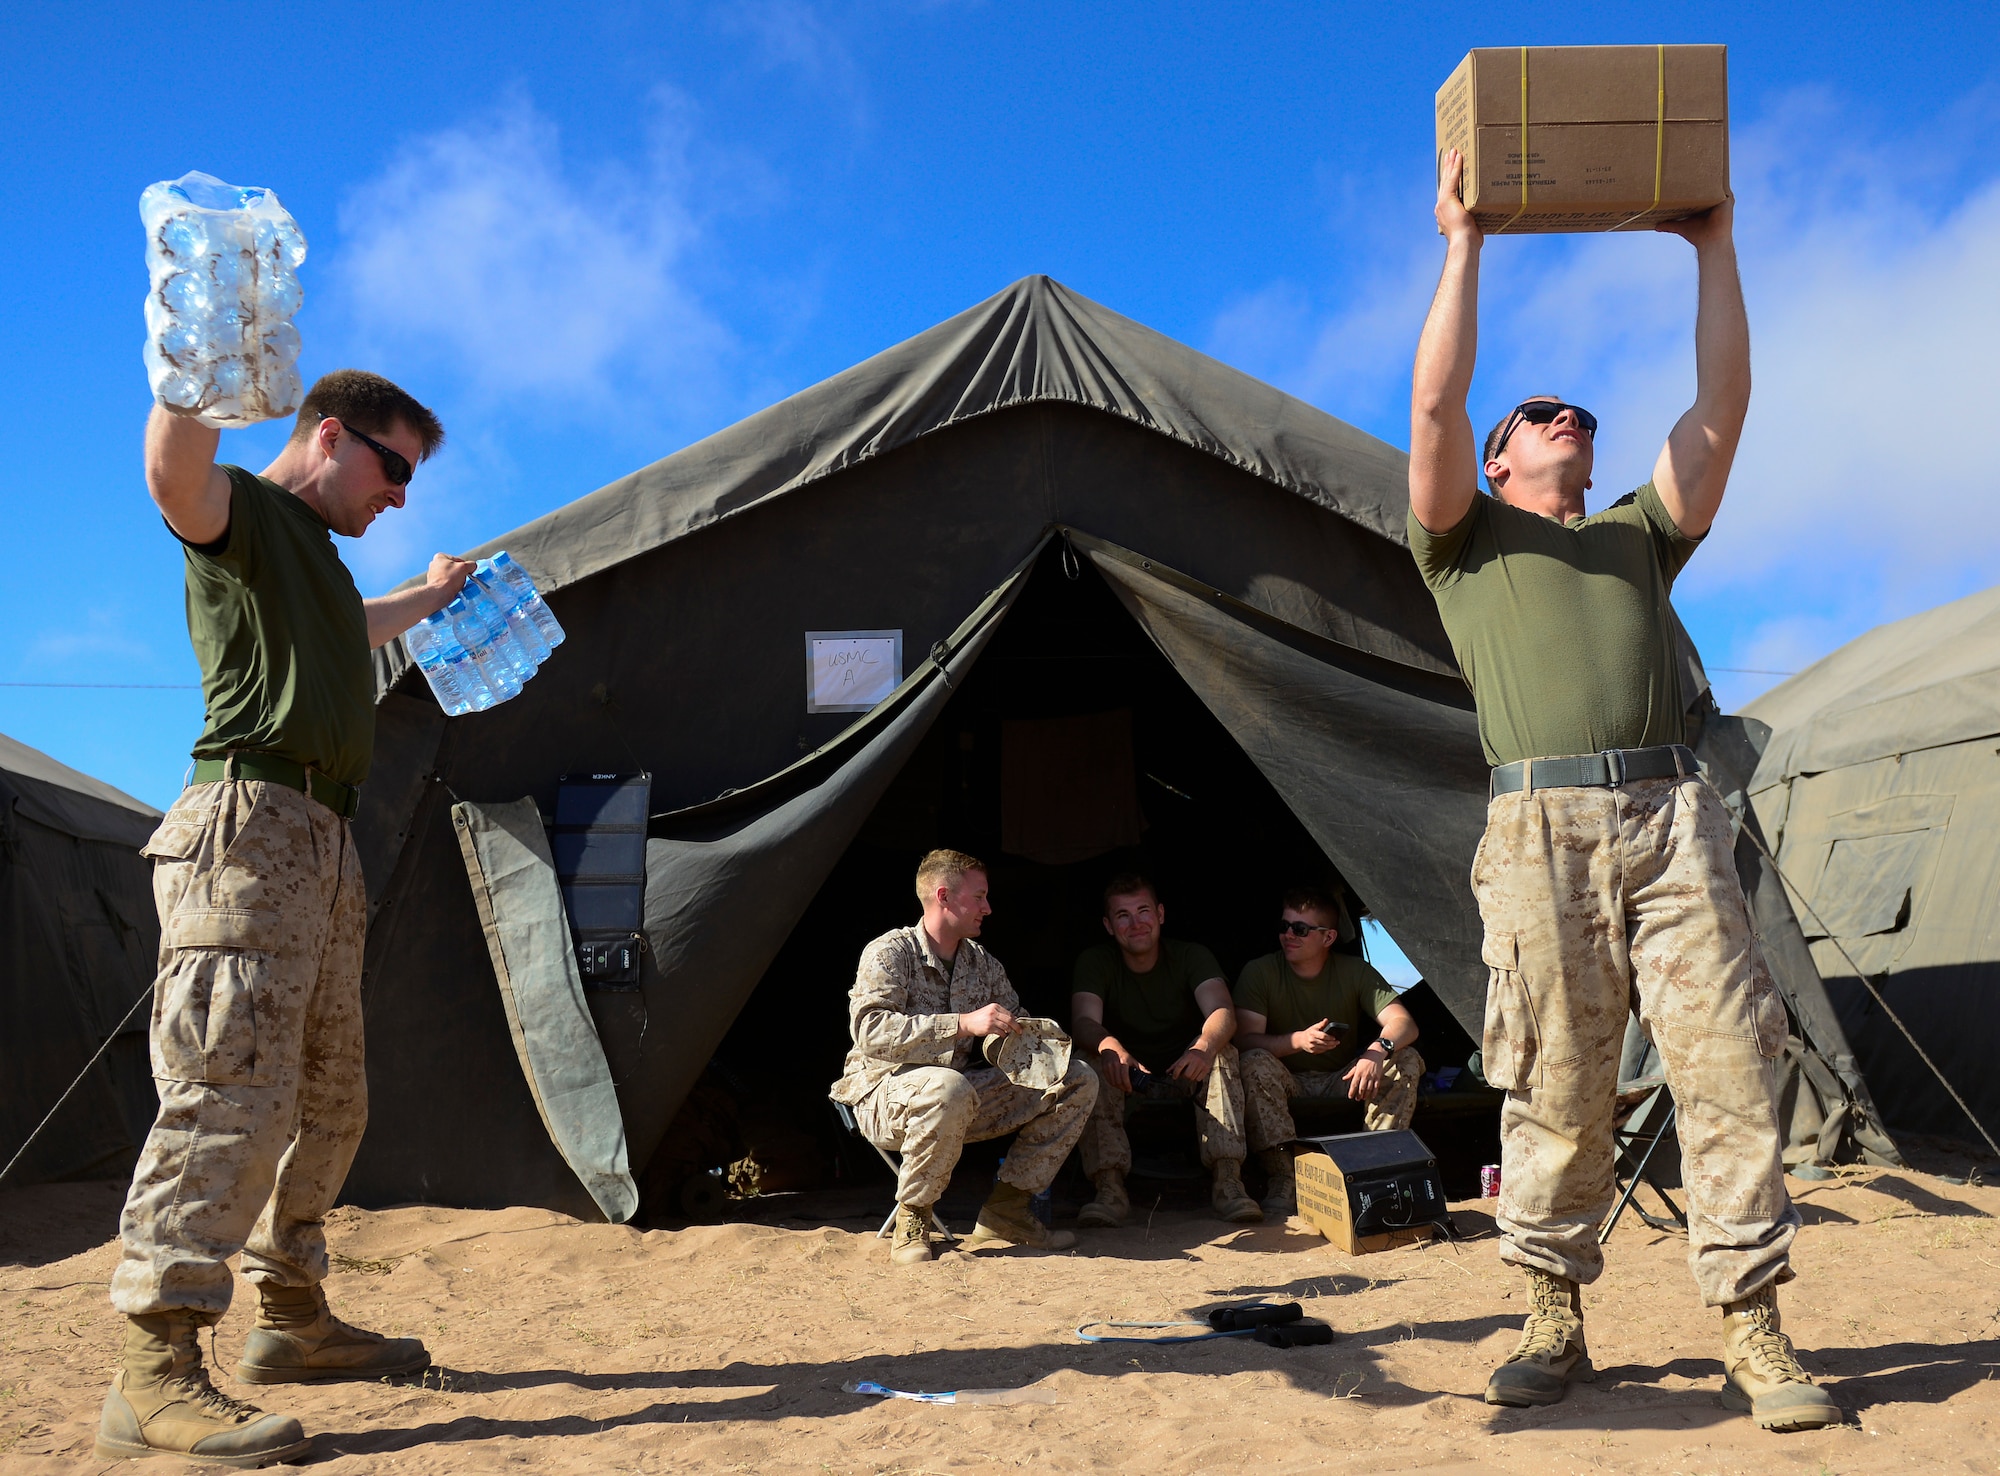 U.S. Marines from the 4th Law Enforcement Battalion work out using cases of water and boxes of meals ready-to-eat during AFRICAN LION 16 at Tifnit, Kingdom of Morocco, April 23, 2016. Of the 11 nations participating in the annual exercise, a group of U.S. military members, Royal Moroccan armed forces members, Spanish Legion soldiers and Royal Netherlands army soldiers lived in field conditions and participated in daily familiarization with other nations’ tactics to improve interoperability. (U.S. Air Force photo by Senior Airman Krystal Ardrey/Released)